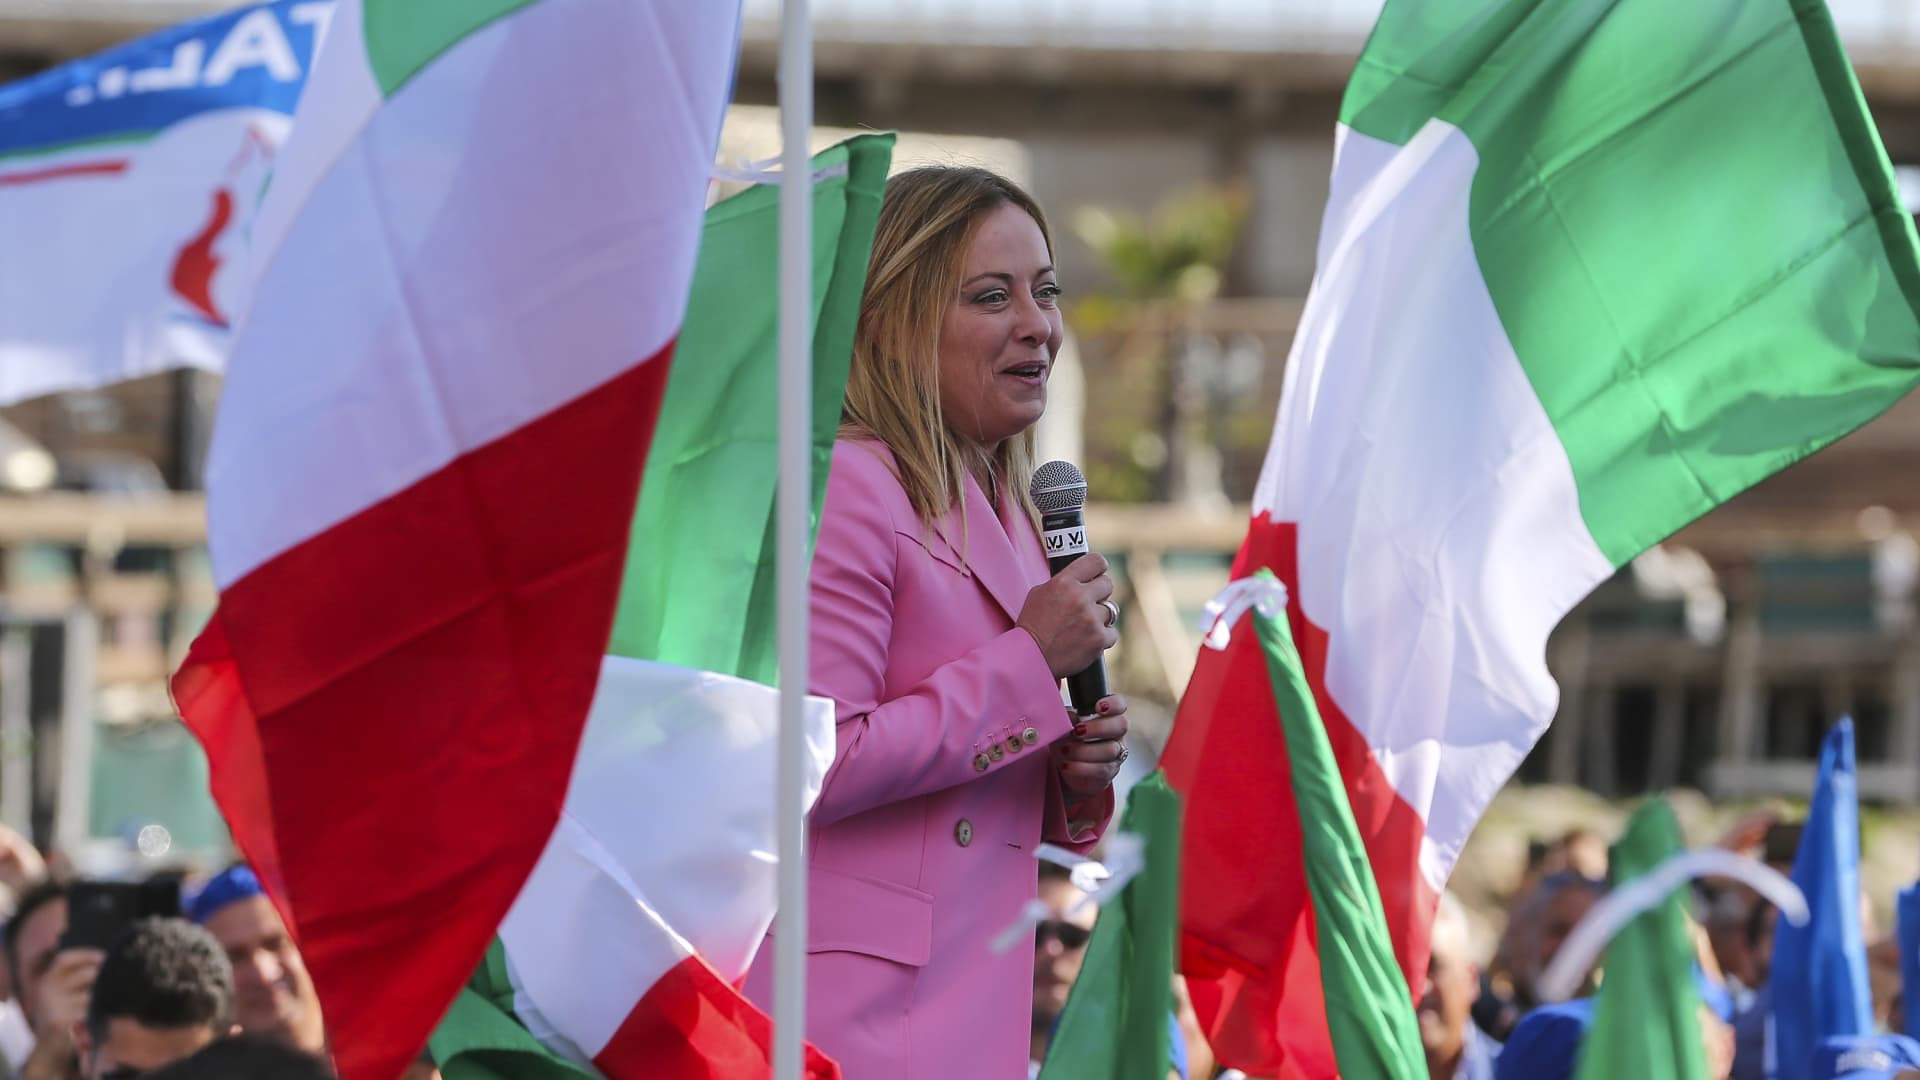 Giorgia Meloni and her far-right Brothers of Italy party top vote in Italian elections, exit poll shows